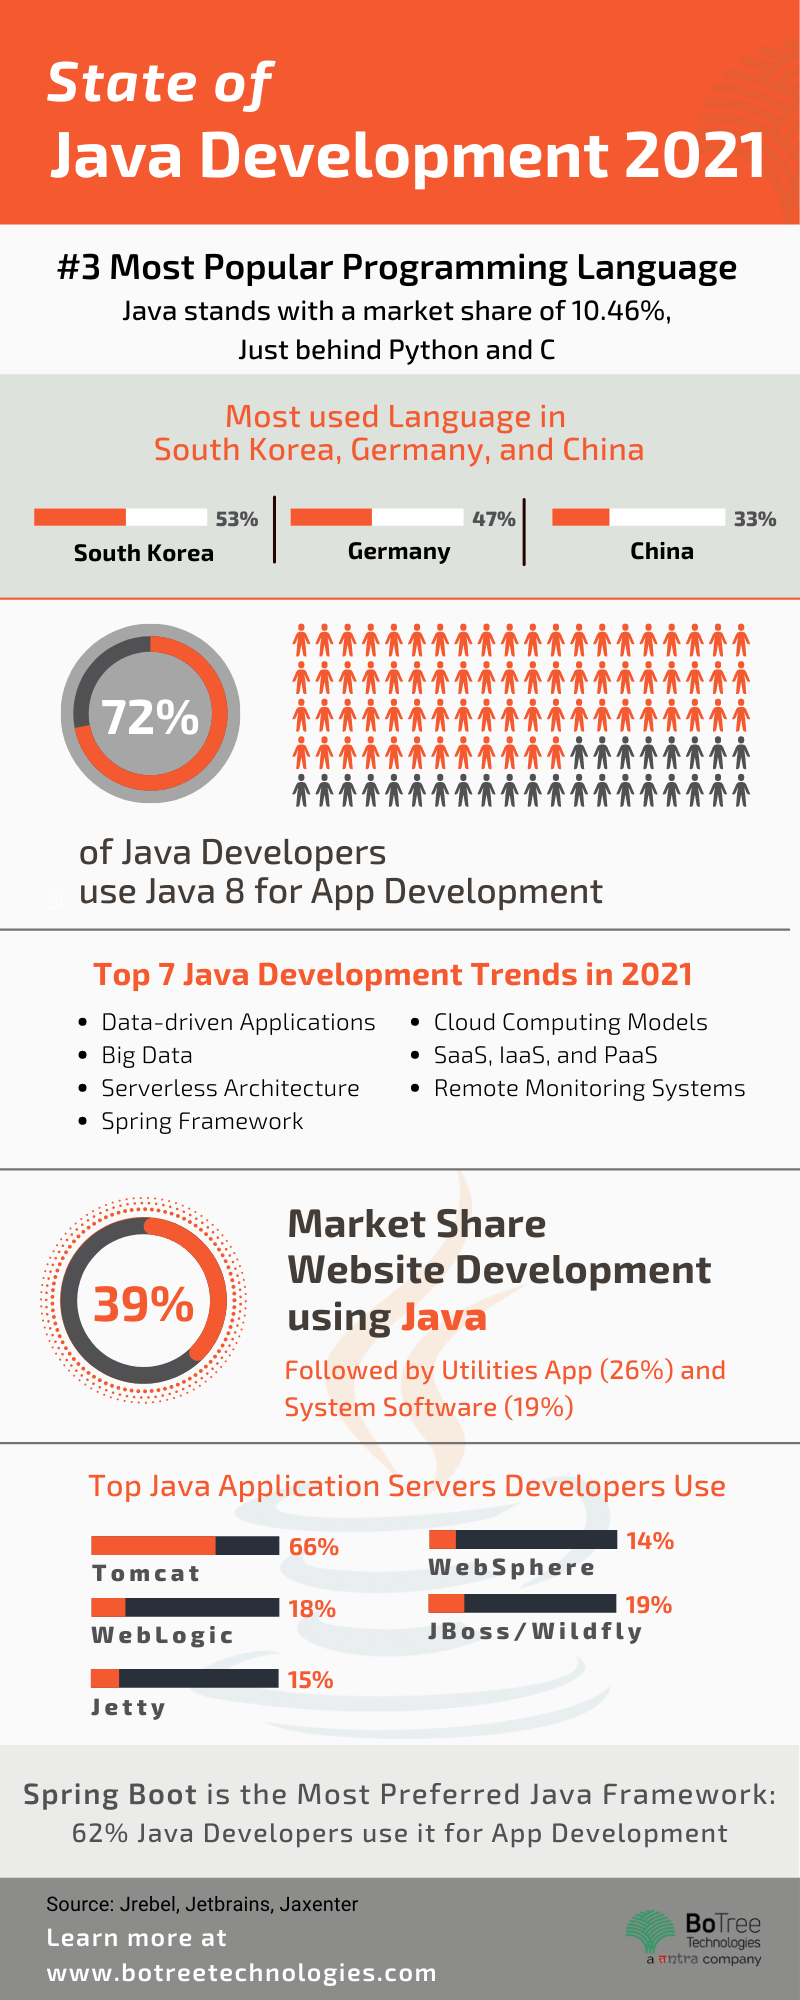 Guide to Hiring Java Developers